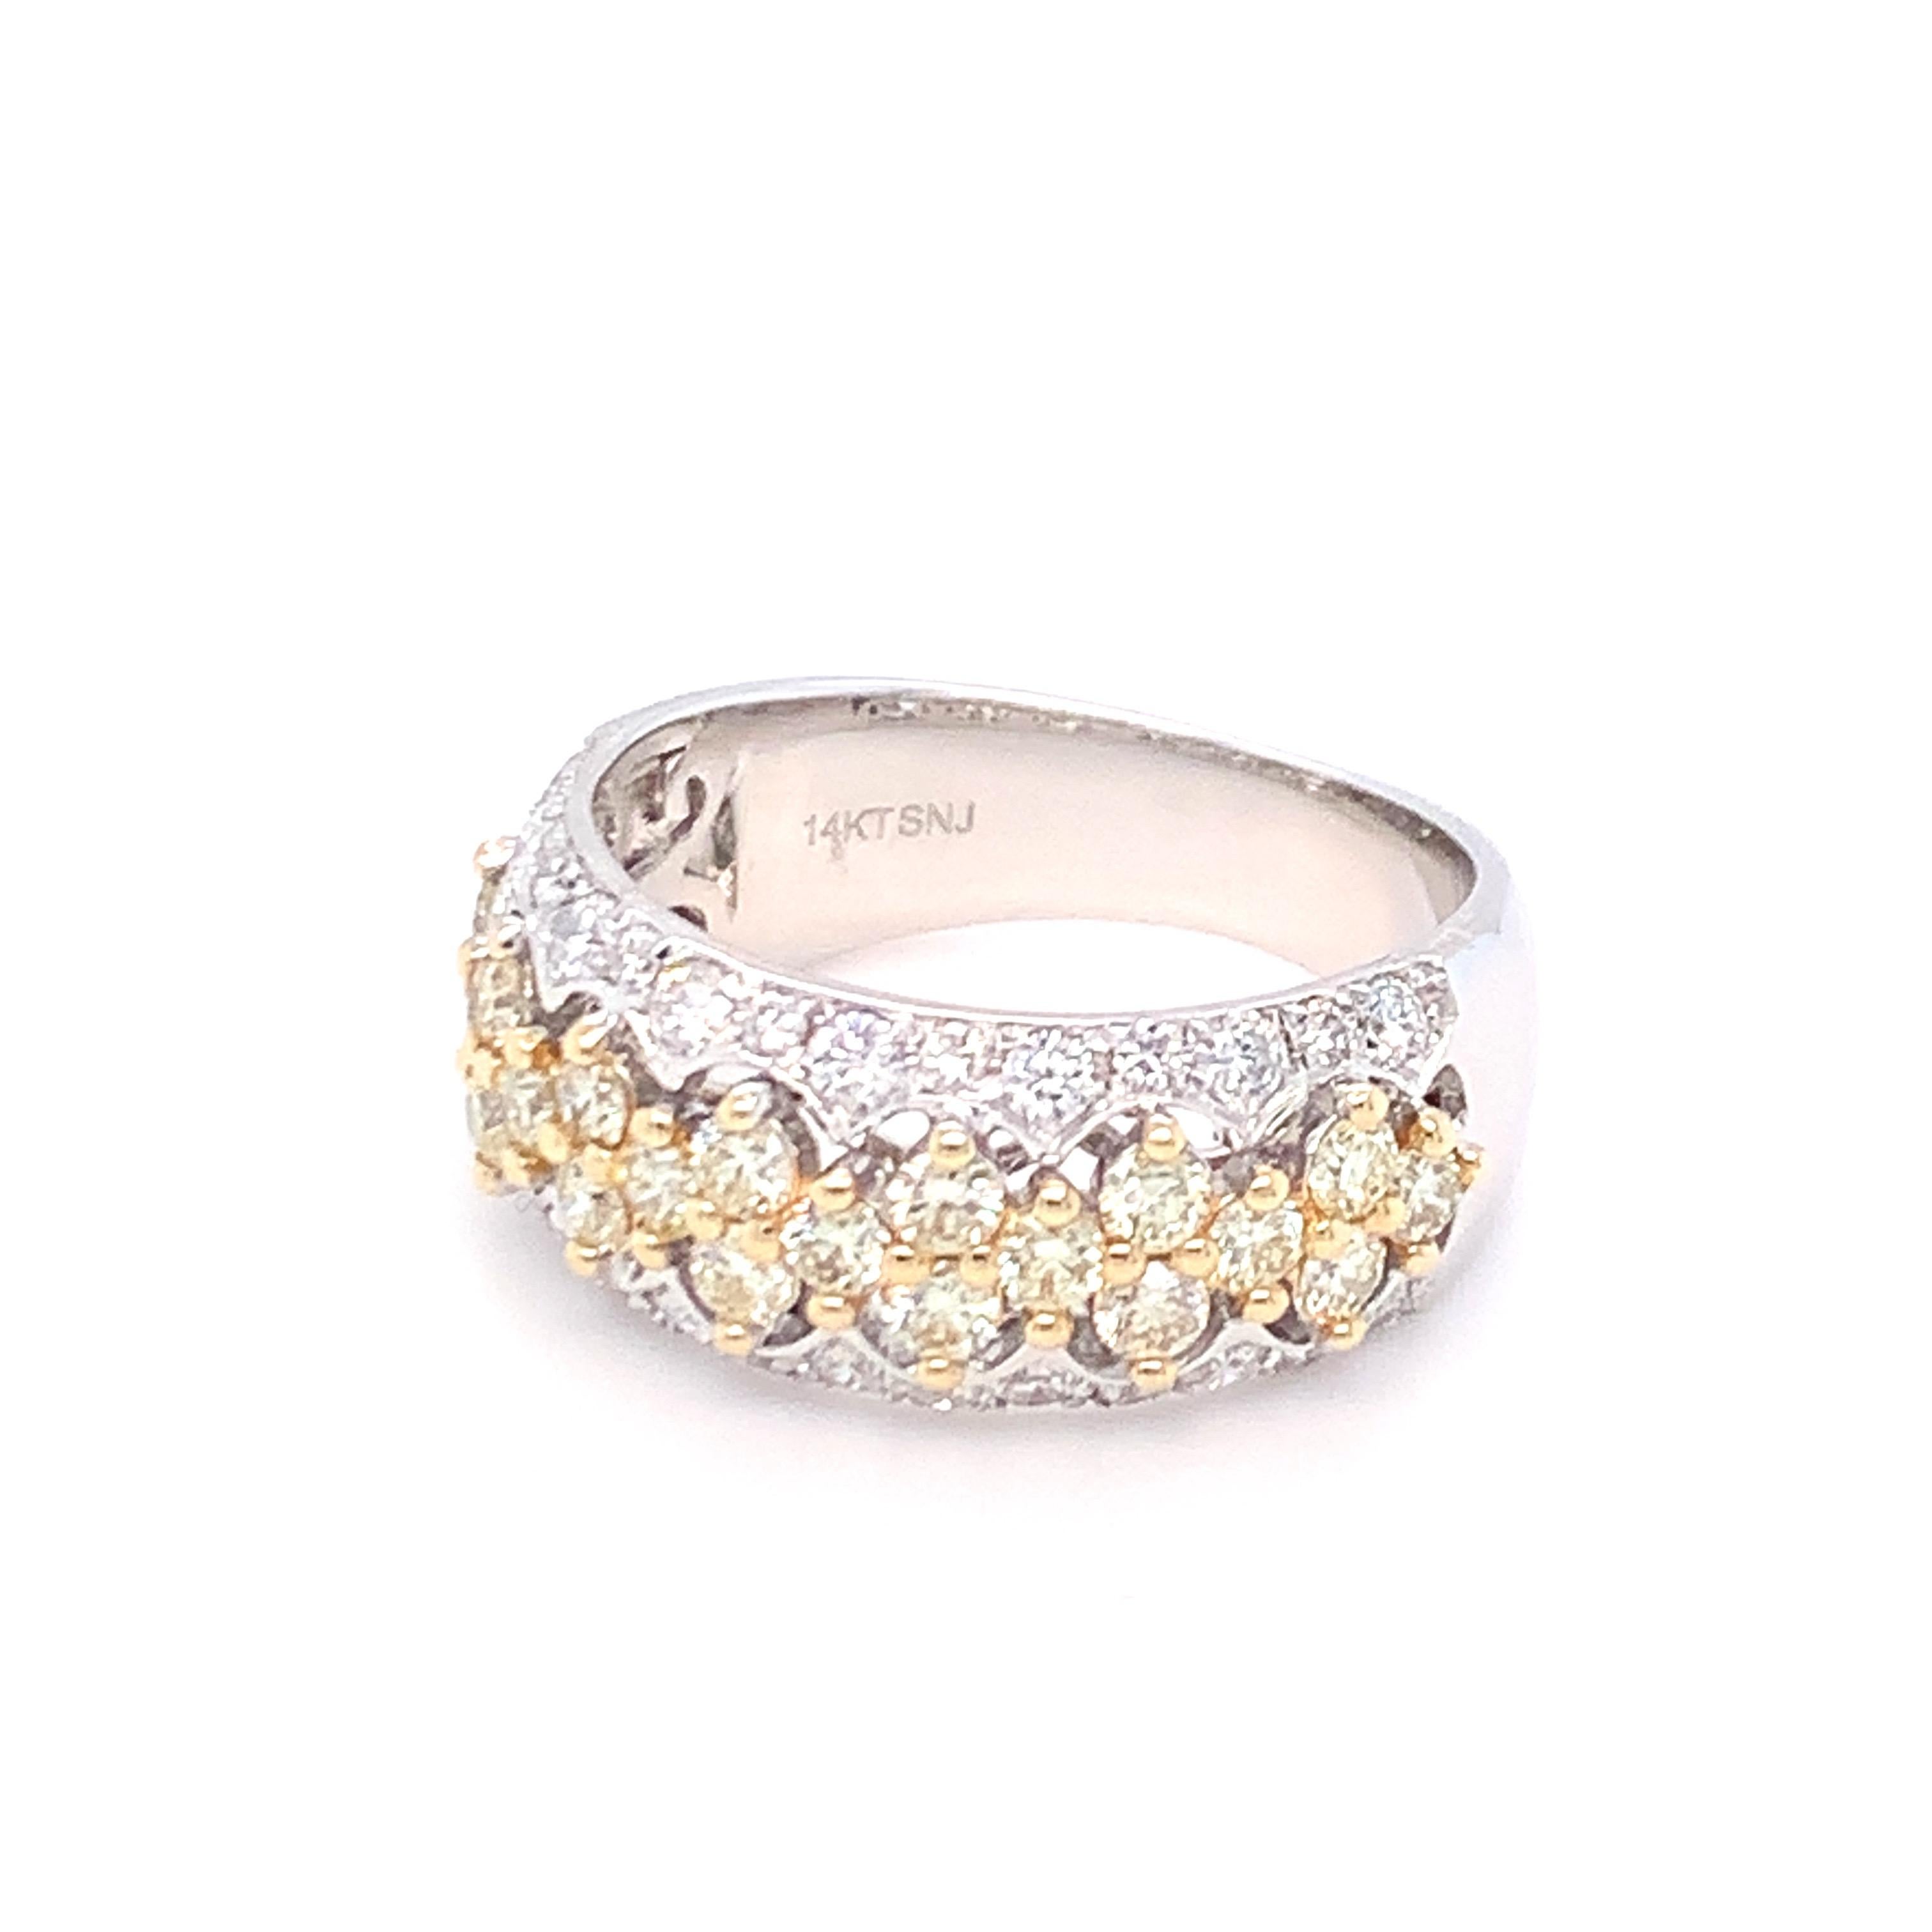 1.45 Carat Yellow & White Diamond Band Ring in 14K White Gold For Sale 5